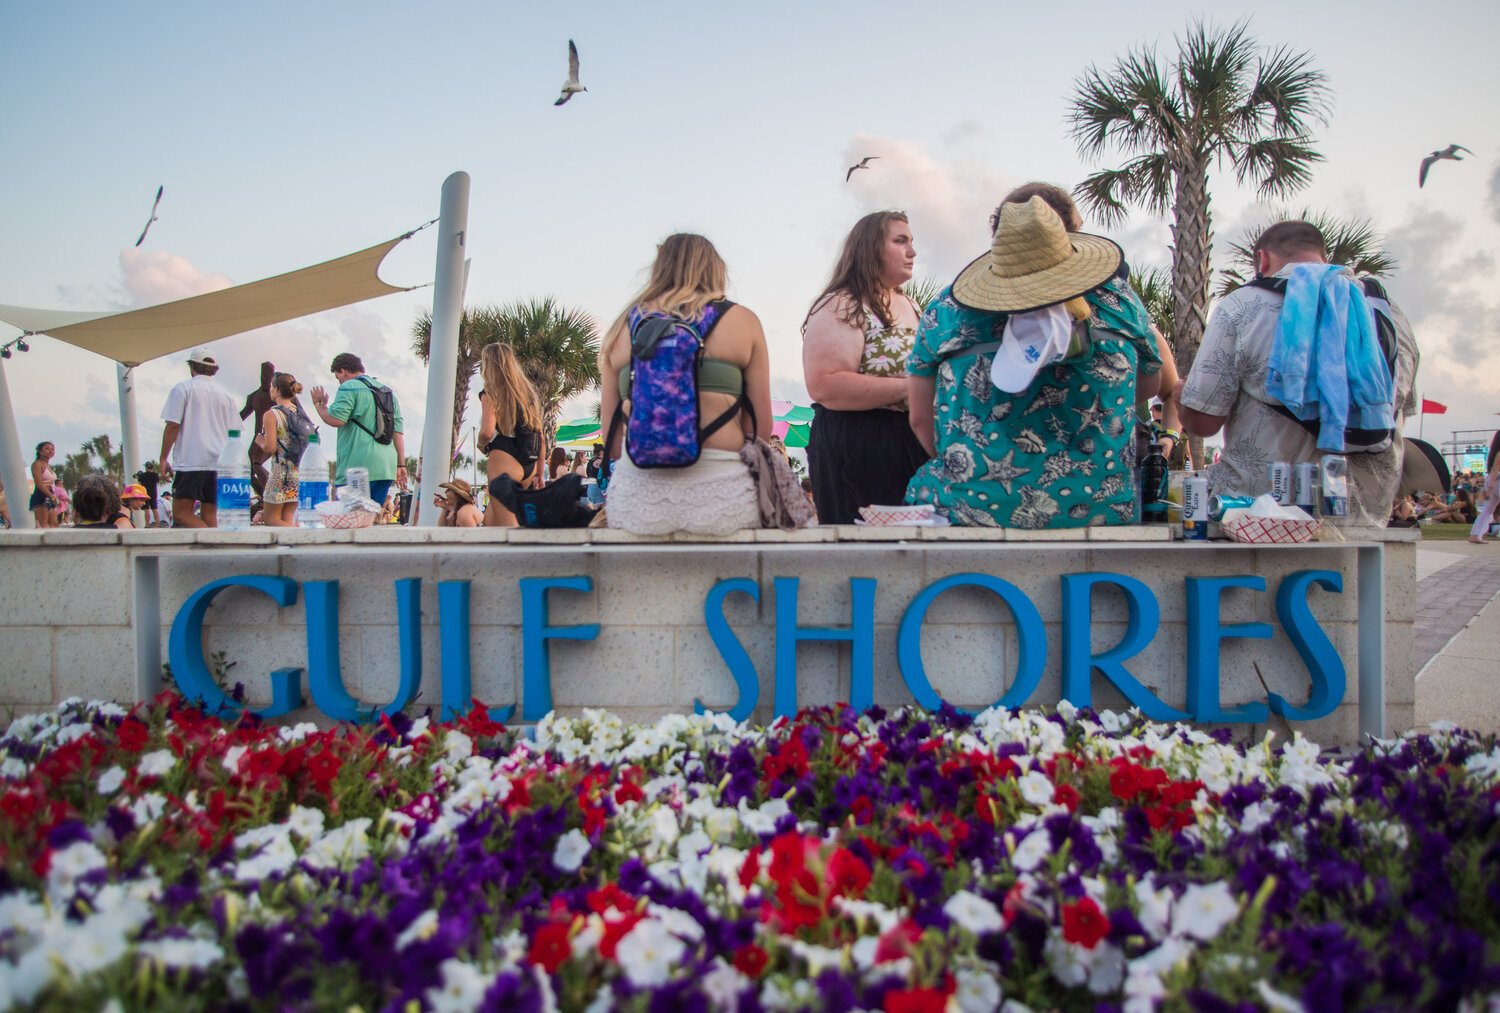 Gulf Shores features white sandy beaches with warm, often calm water. A state park with nature trails and lake views shares some of the city's shoreline.